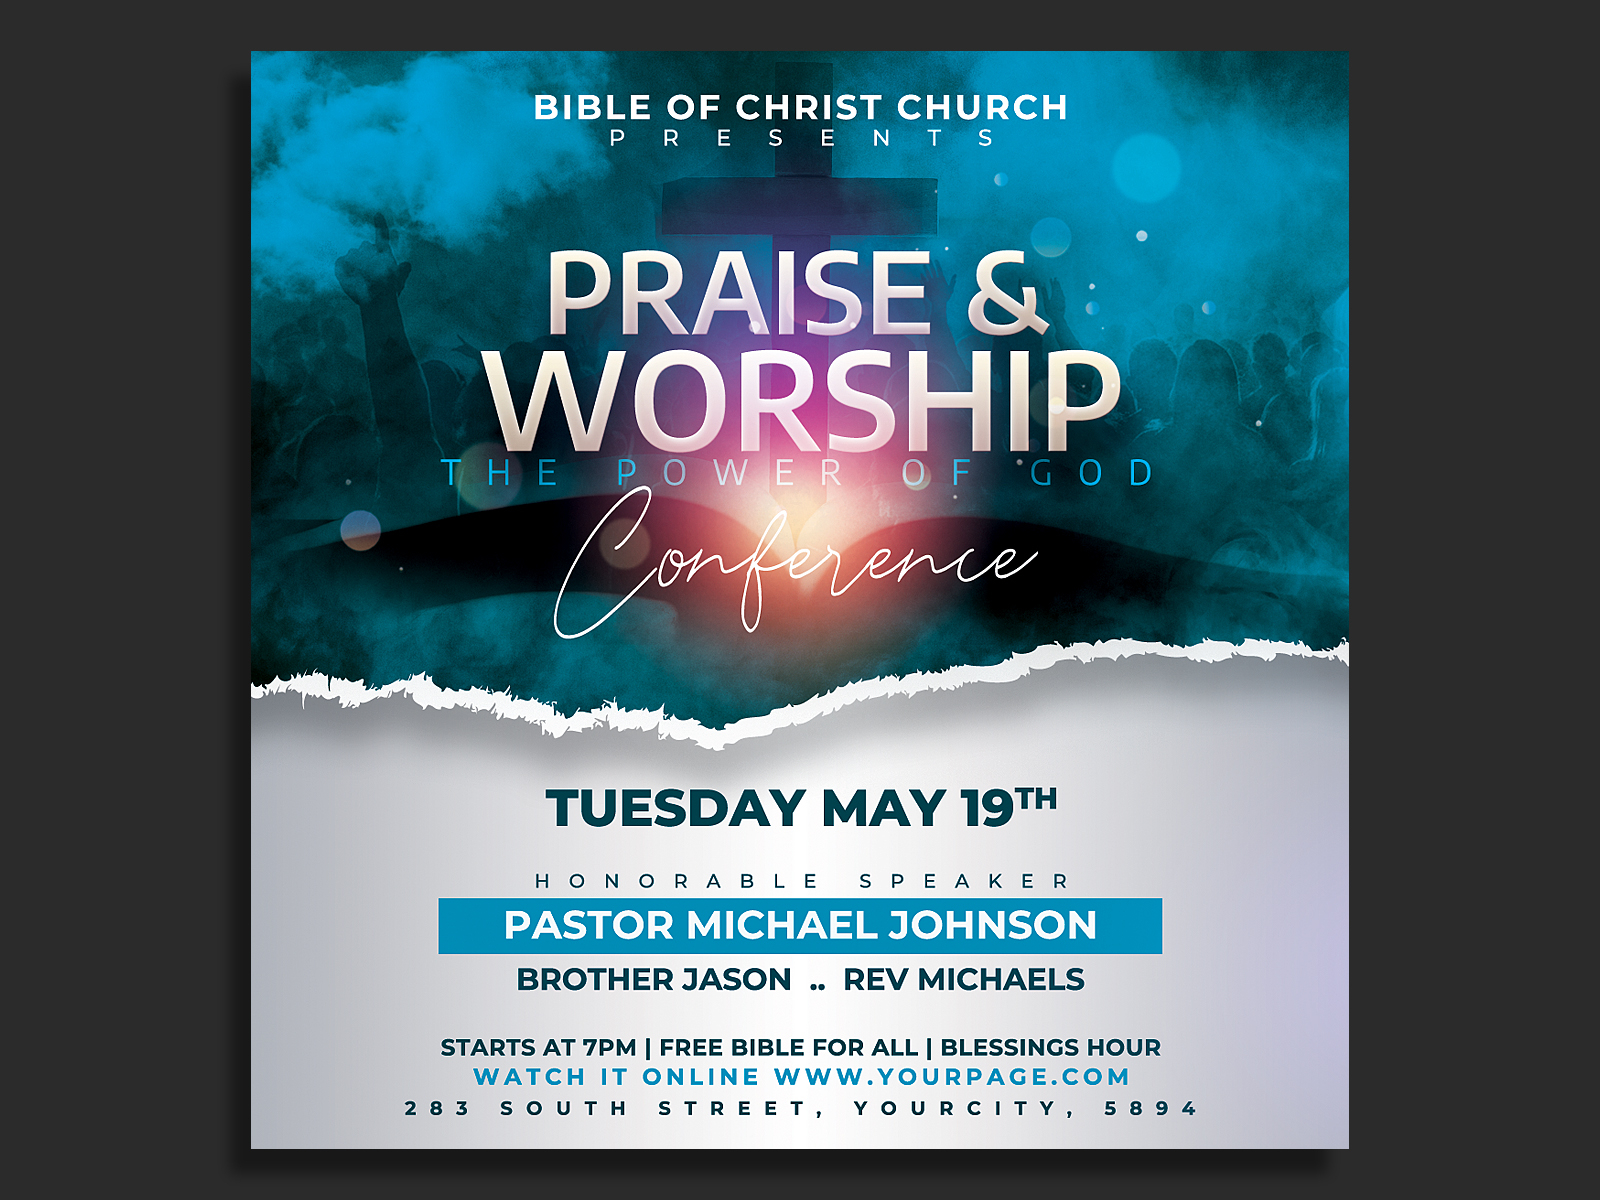 Church Flyer Template by Hotpin on Dribbble